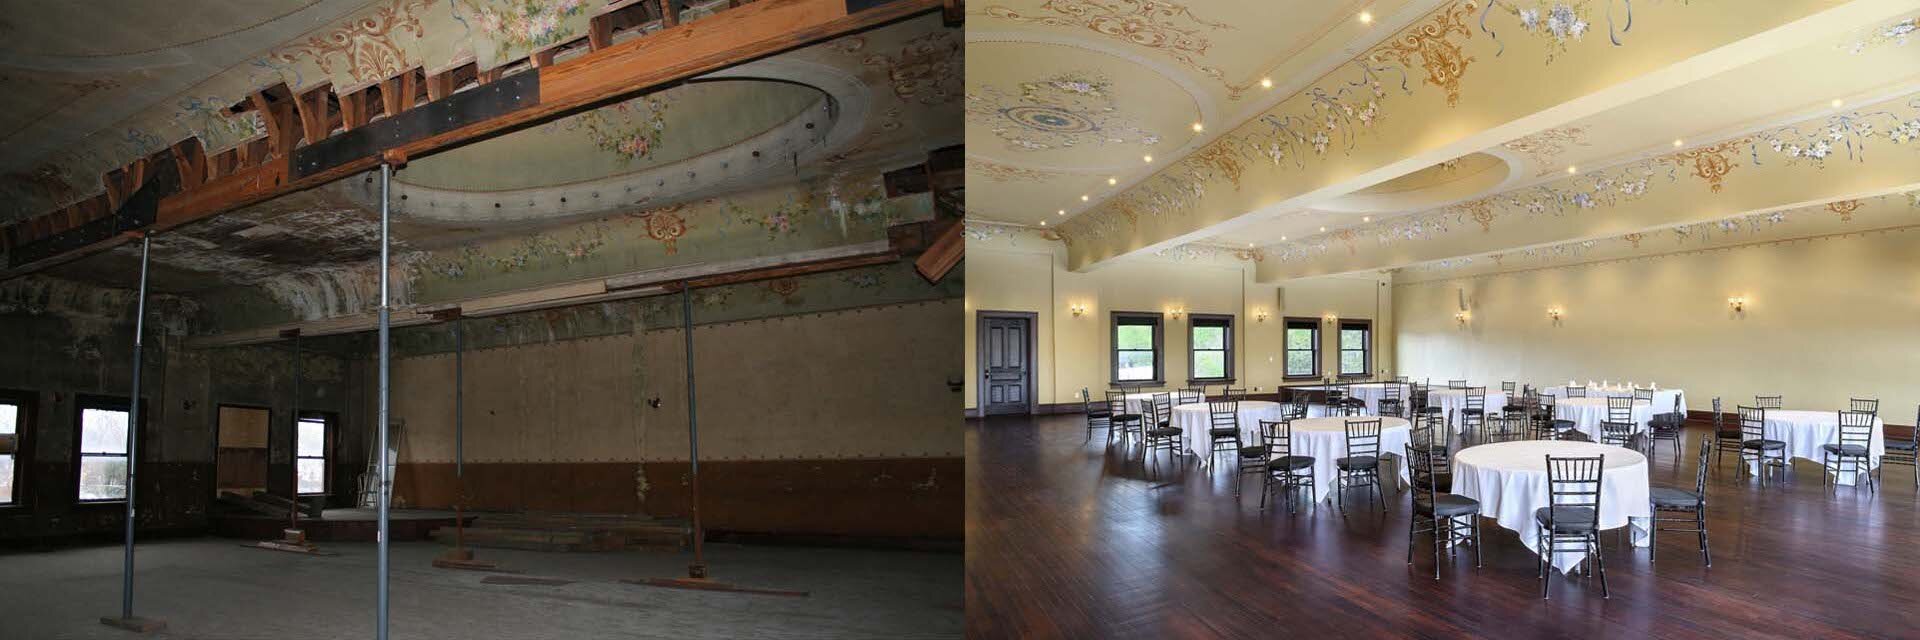 The ballroom at the Eagles Theatre before and after renovations.